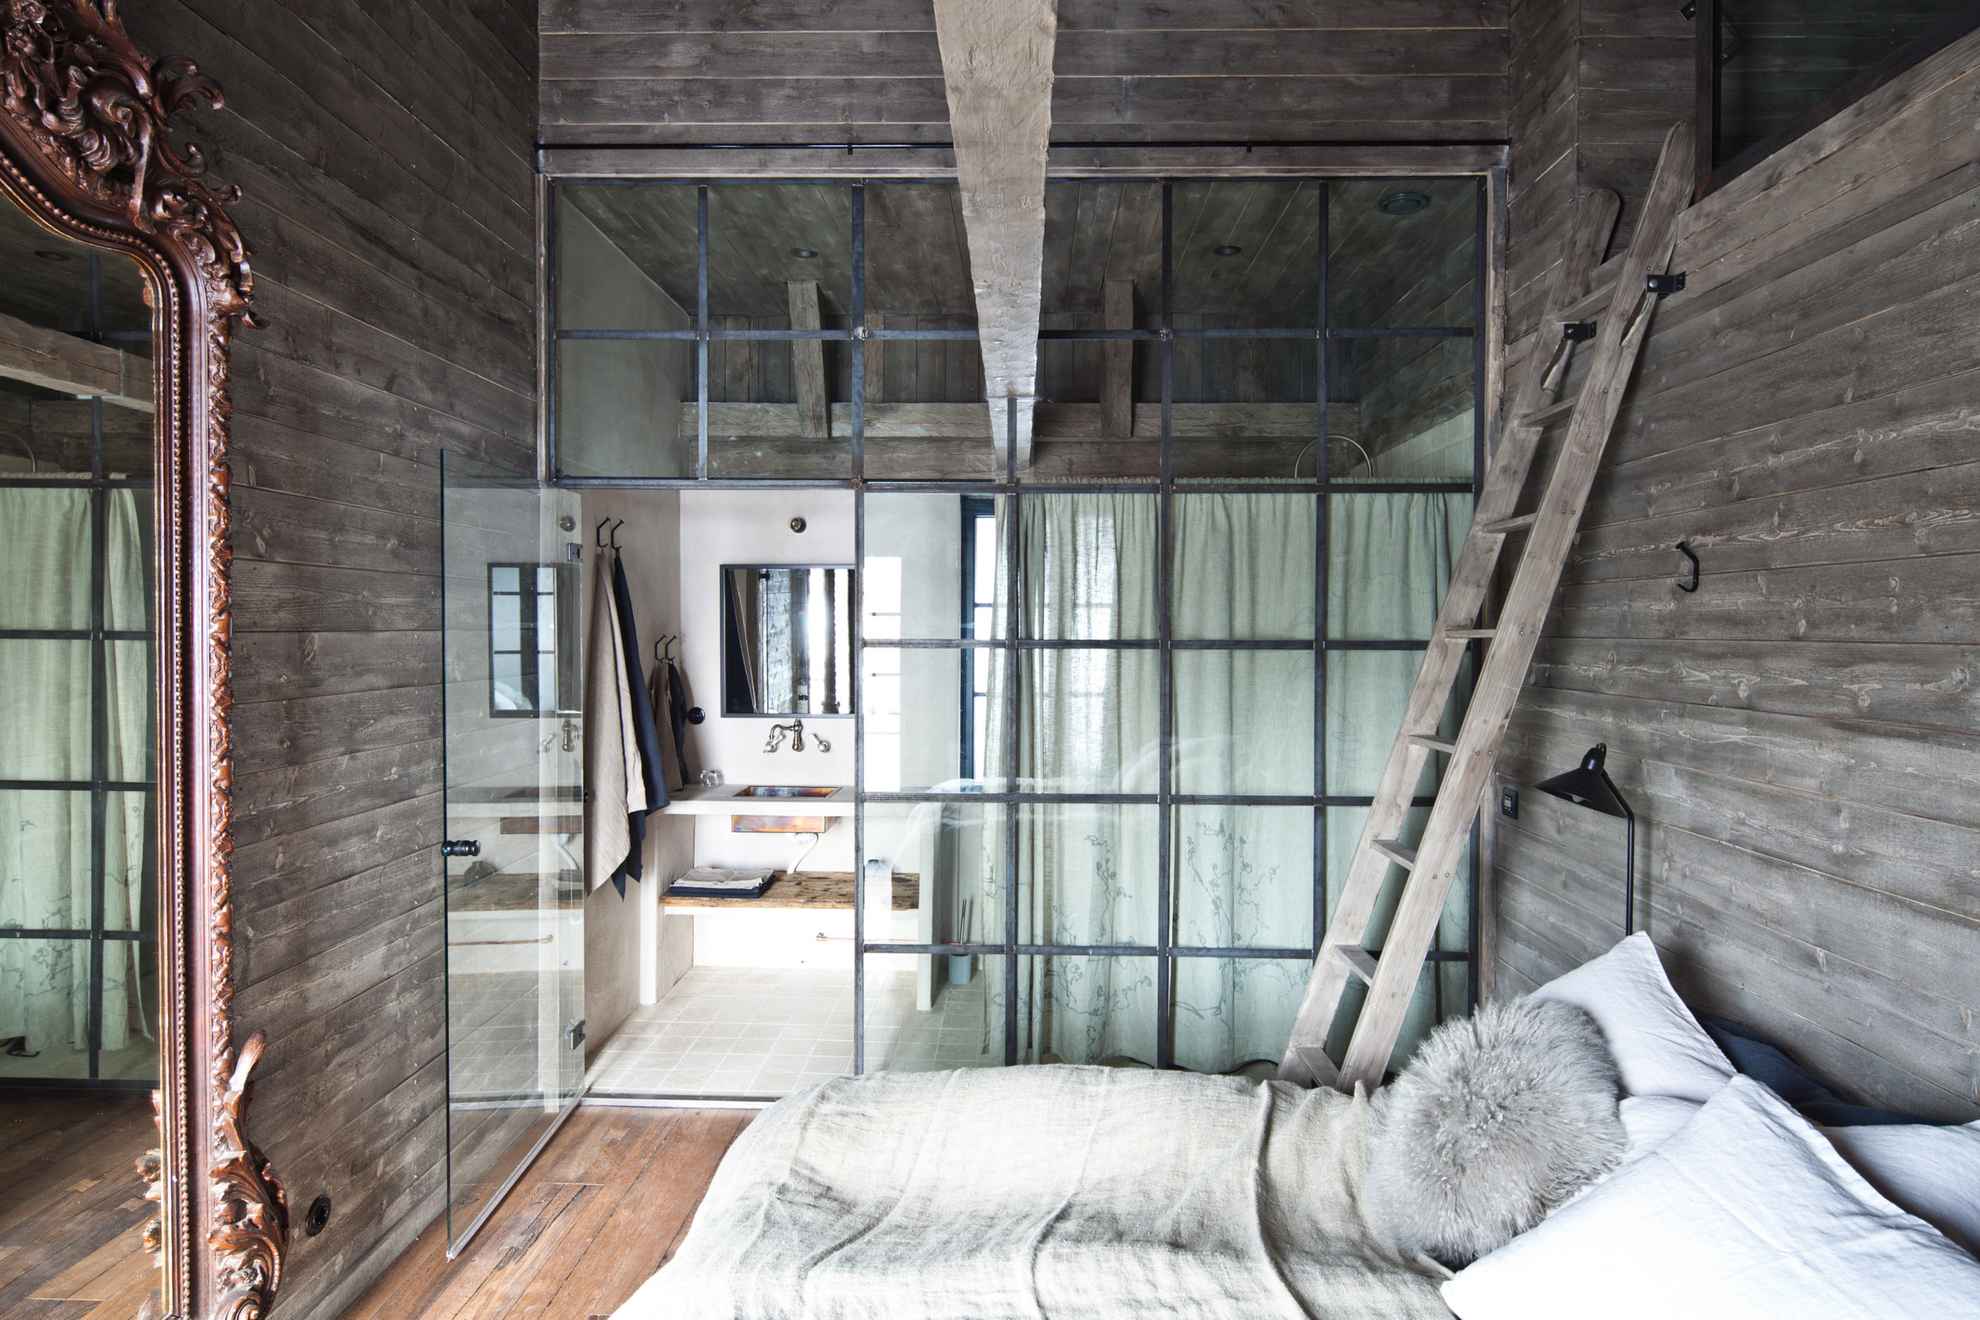 A hotel room with wooden walls. The room has a glassed-in bathroom with a curtain. There is also a ladder leading to a sleeping loft.